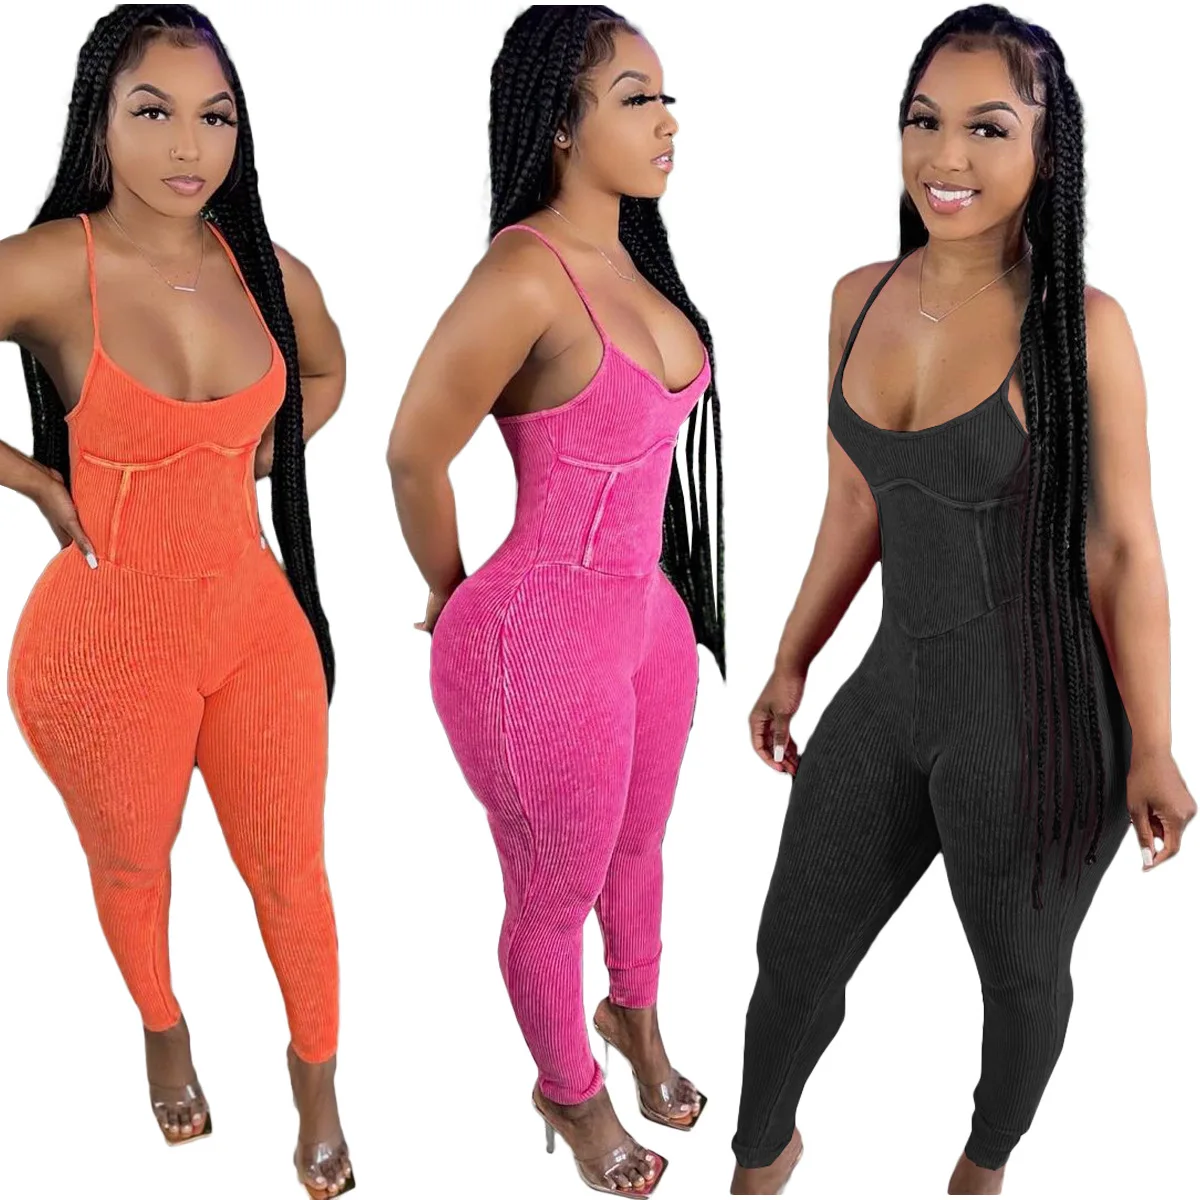 

2021 Women Ribbed Stylish Fashionable Jumpsuits Trending Clothes Ladies Woman One Piece Sexy Jumpsuits Hollow Out Bodysuits